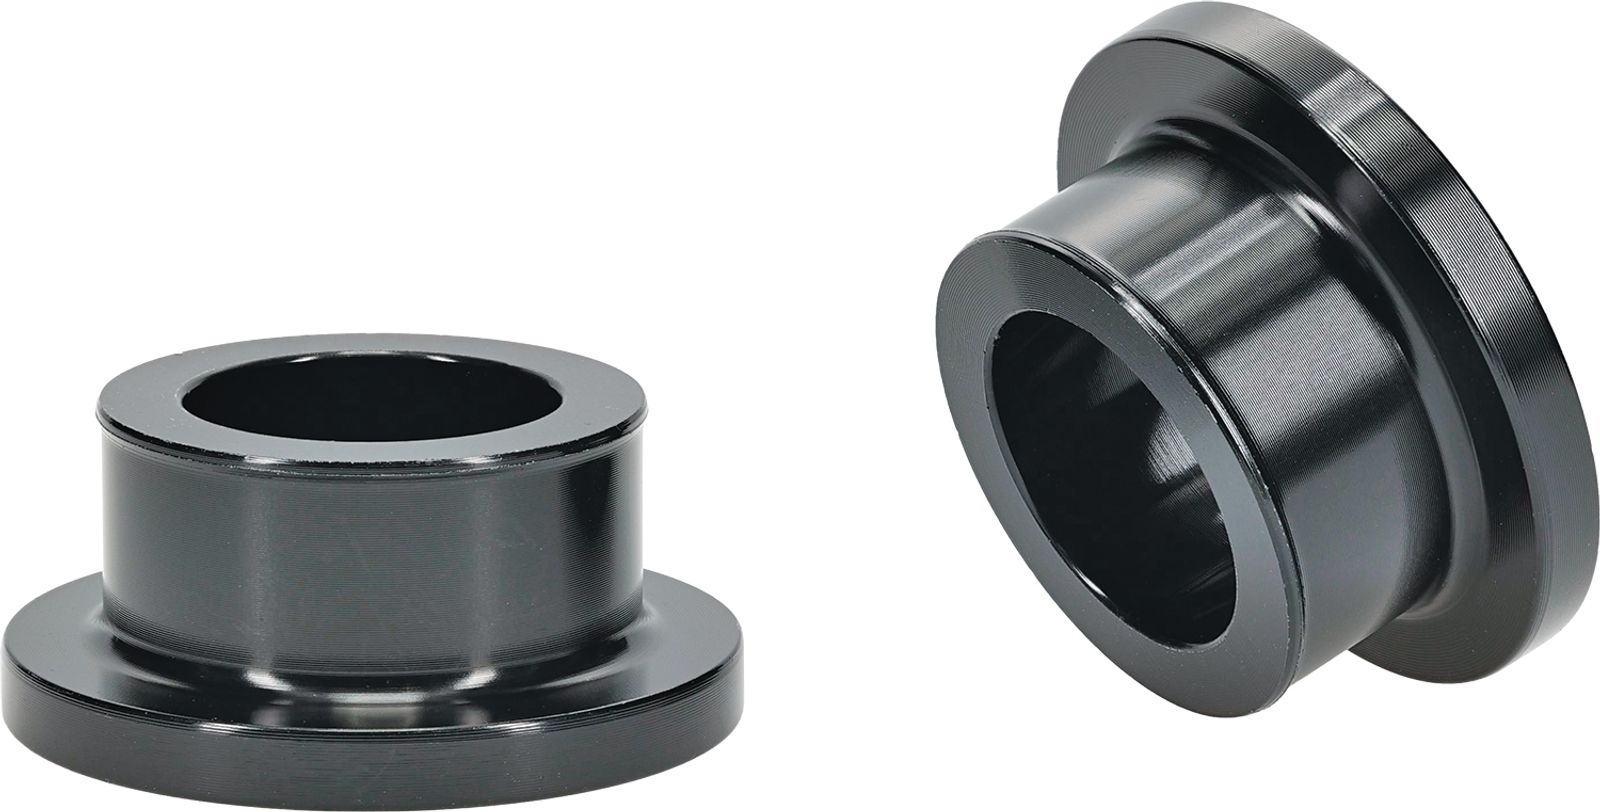 Wrp Rear Wheel Spacer Kits - WRP111048-1 image